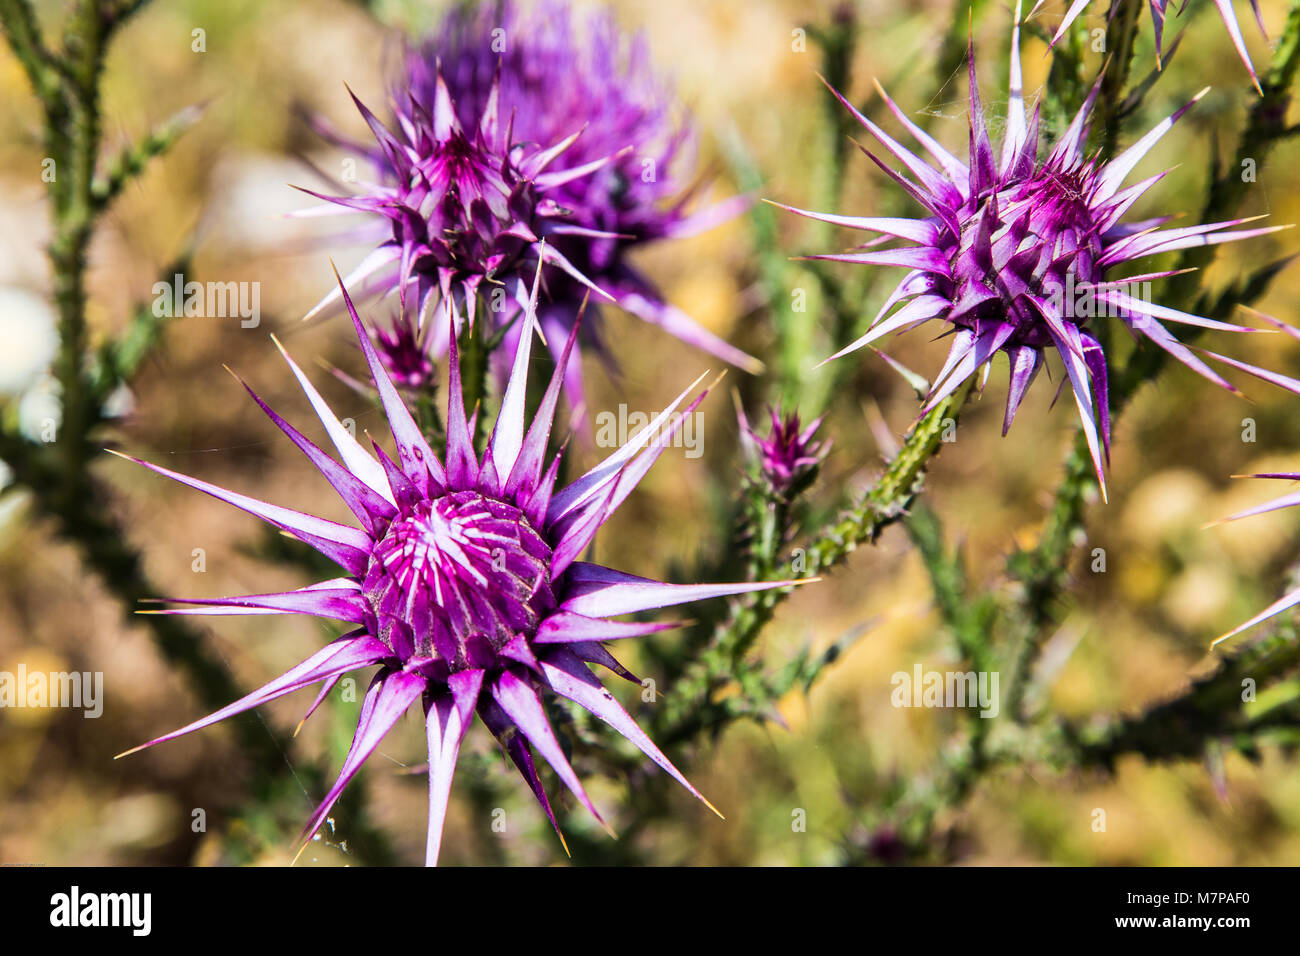 violett flowers with thorns Stock Photo